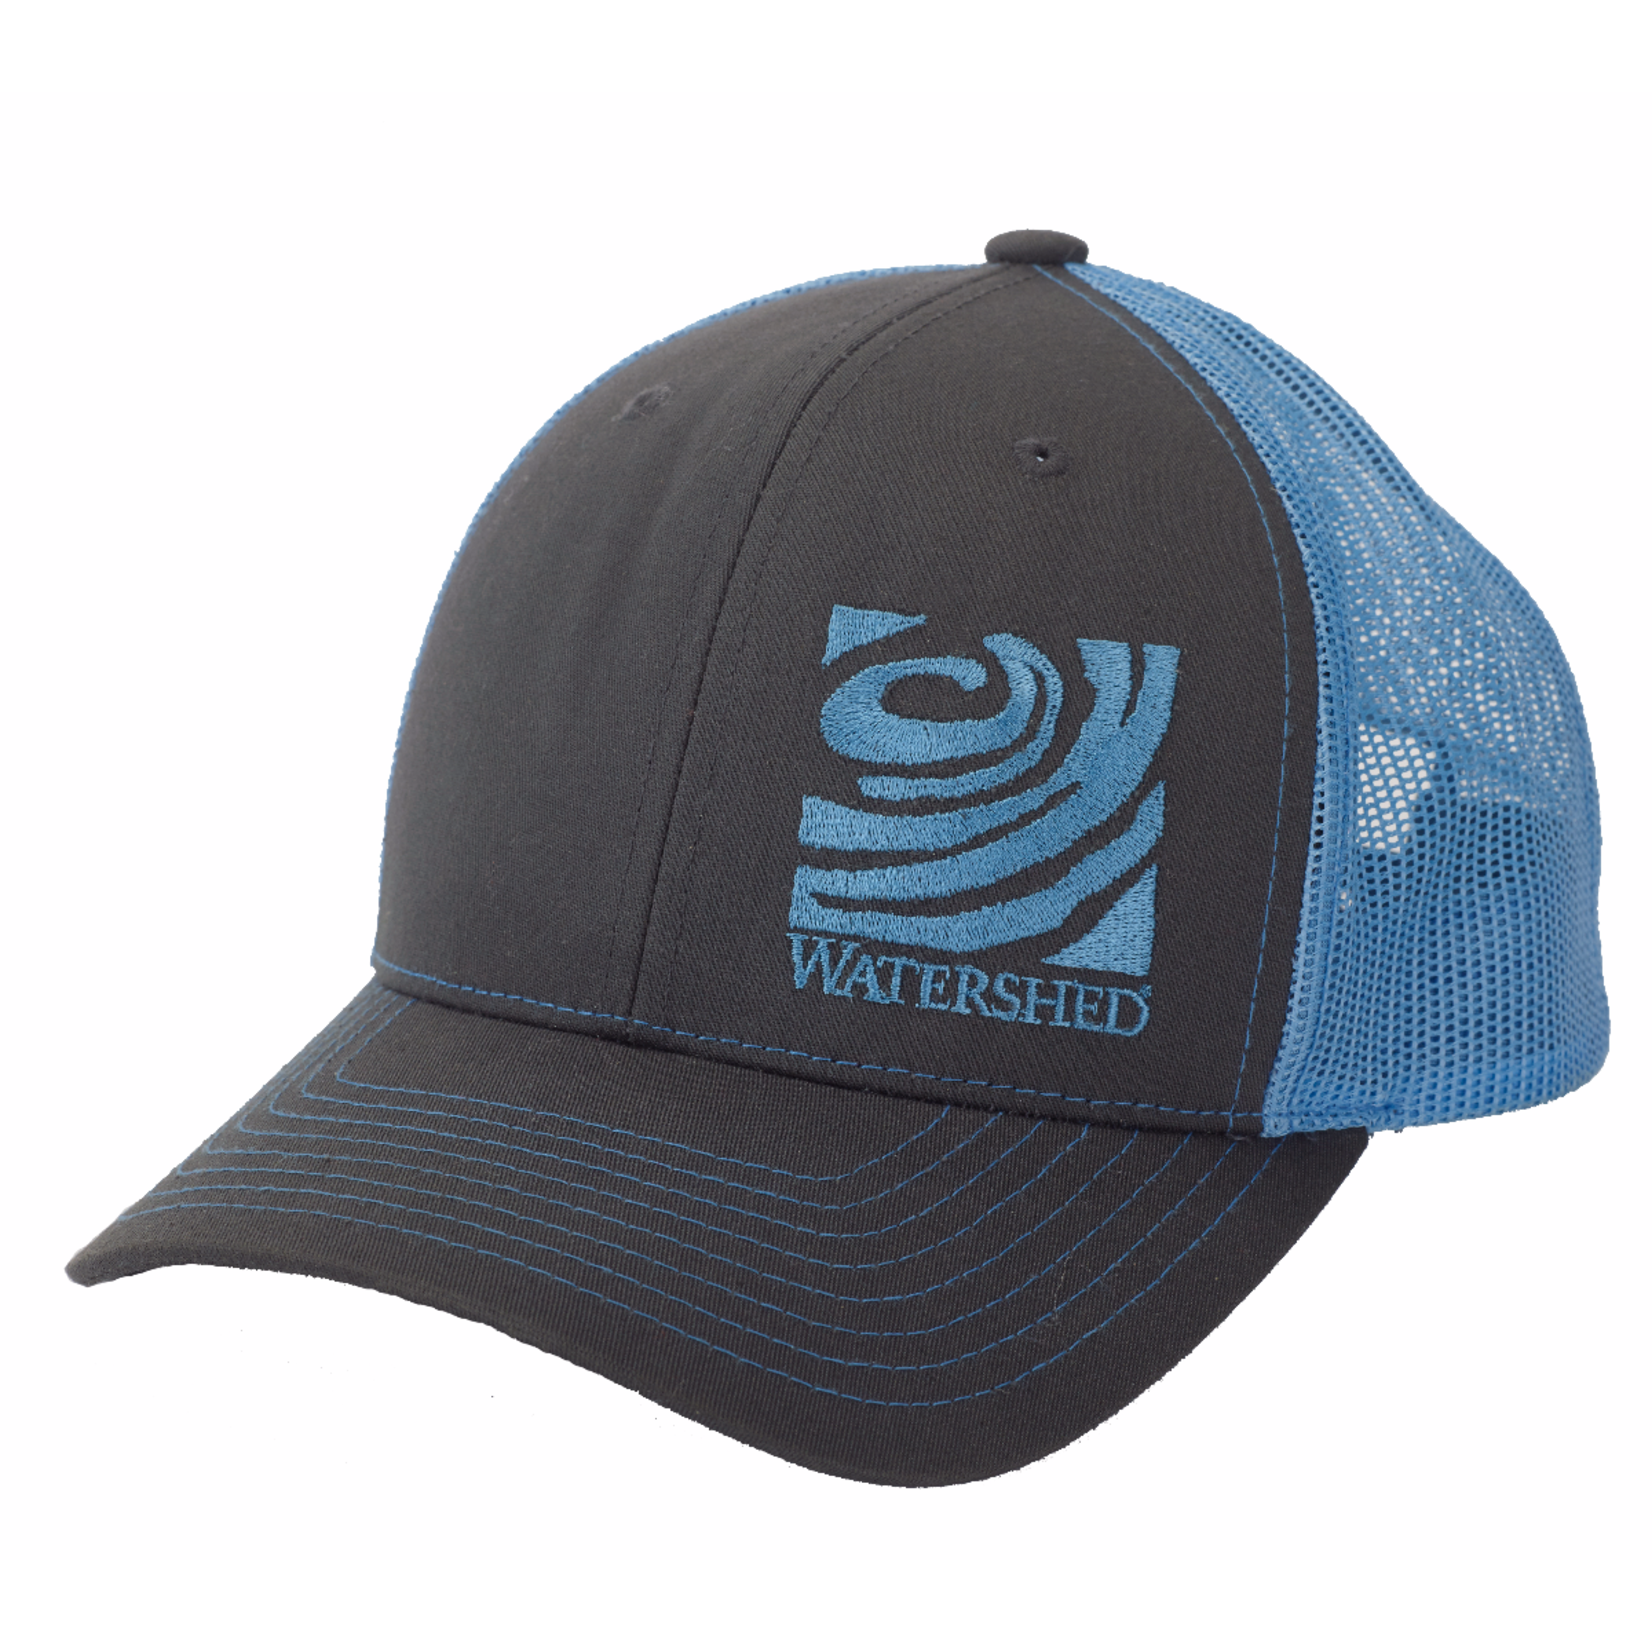 Watershed Watershed Shed Trucker Hat